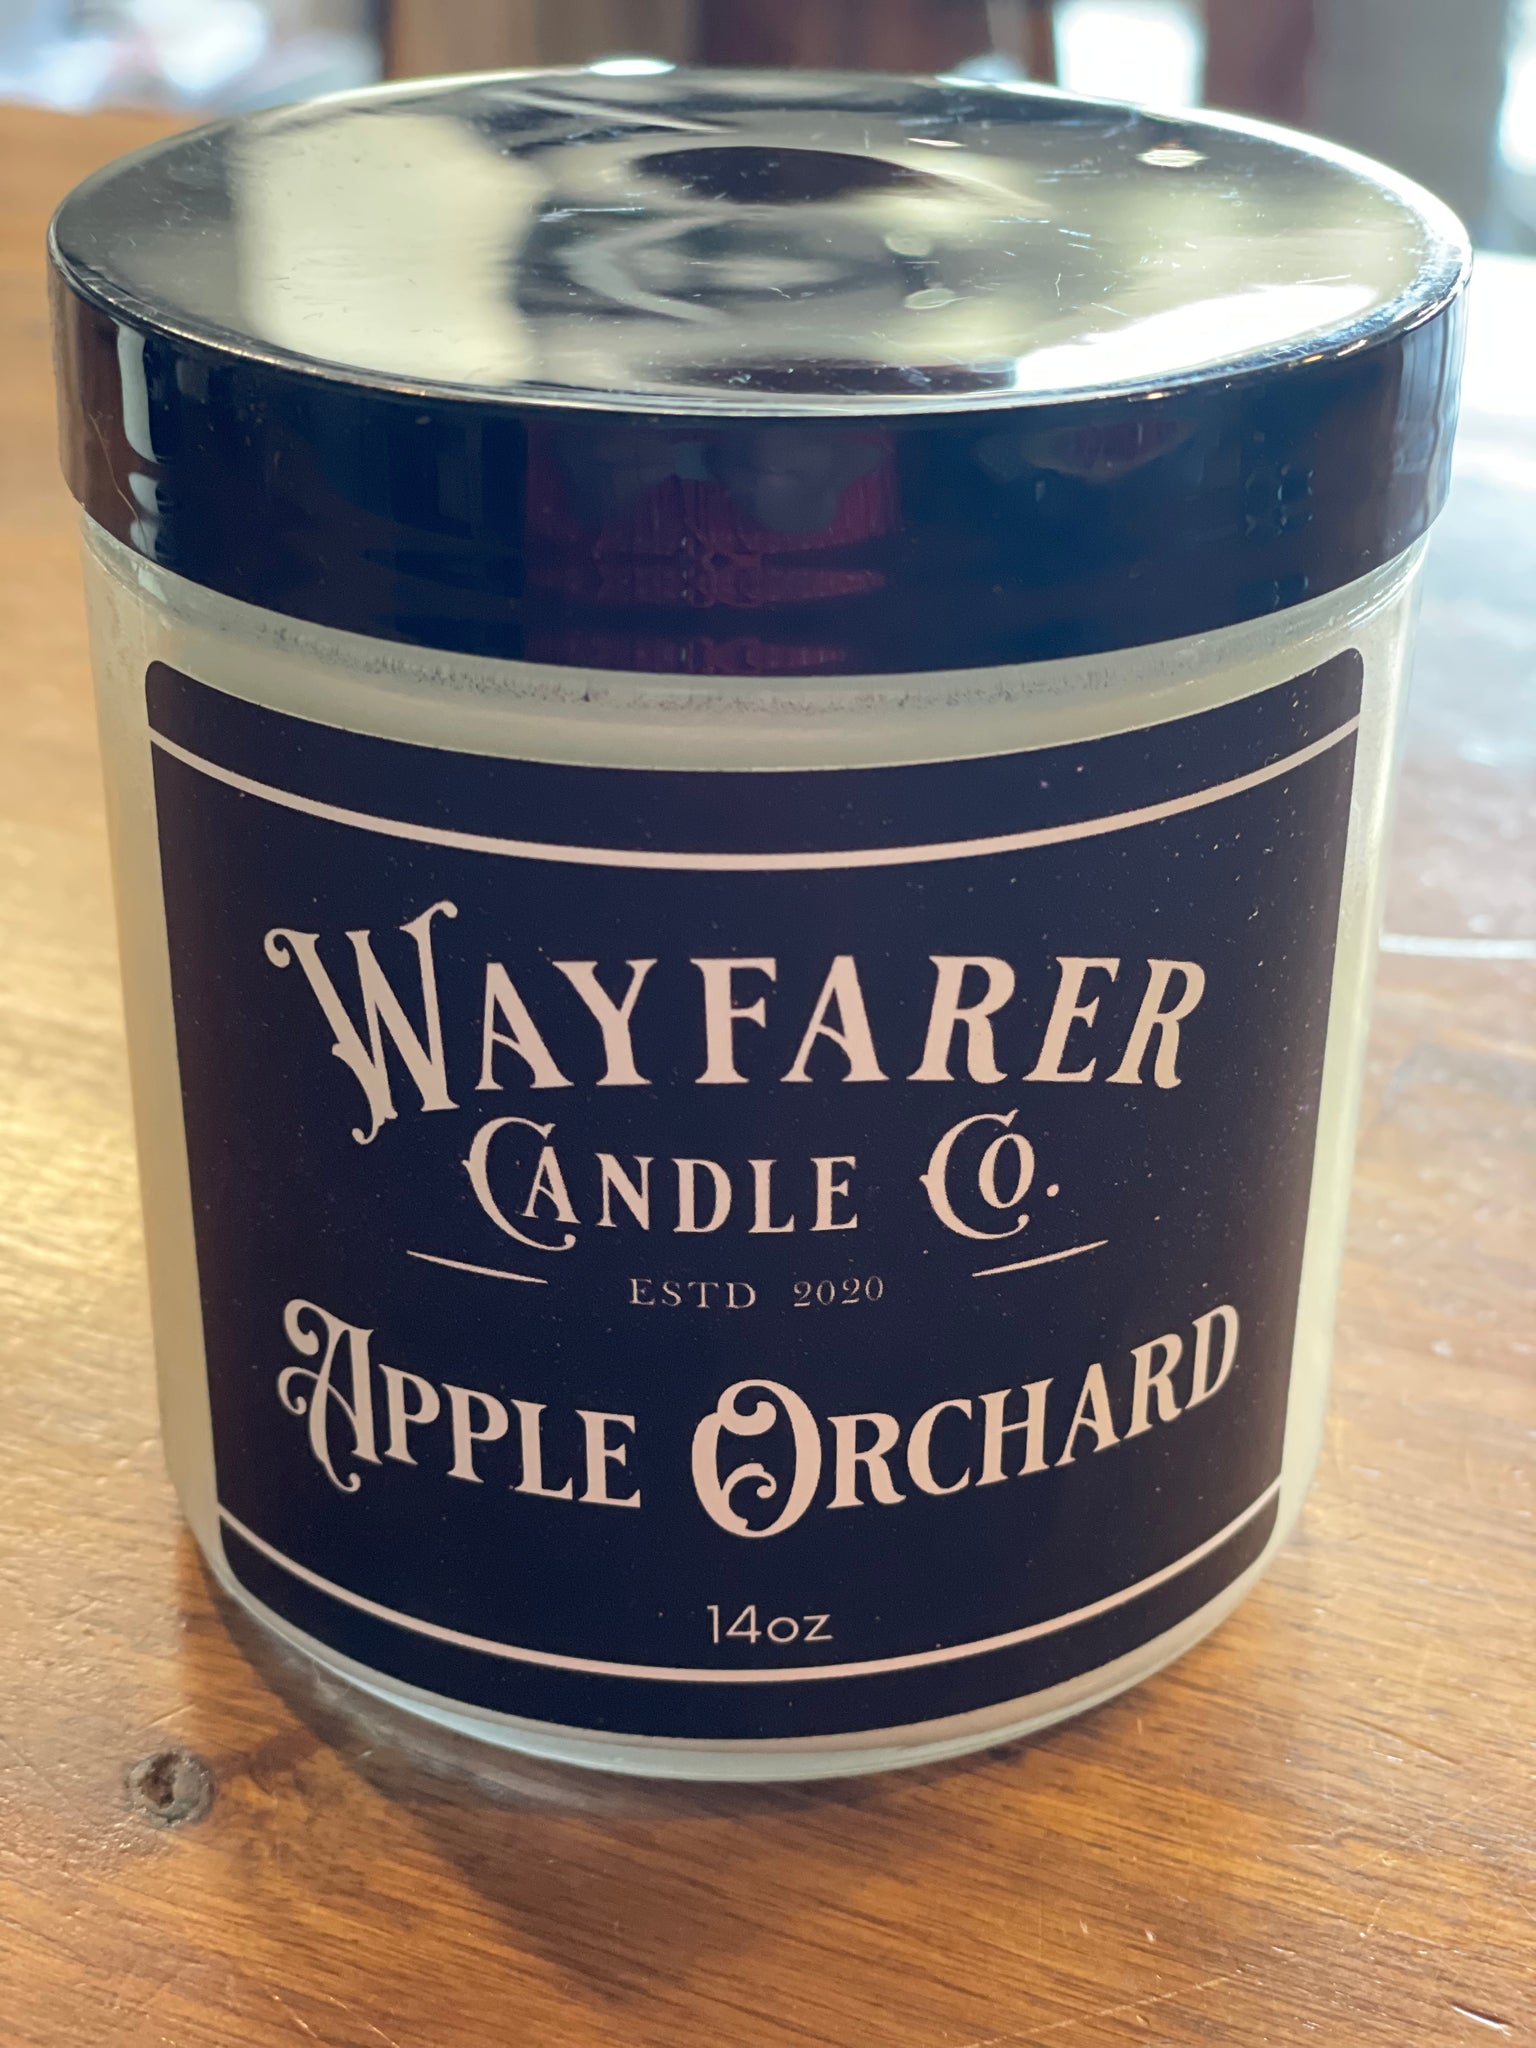 Apple Orchard Candle - 14oz.